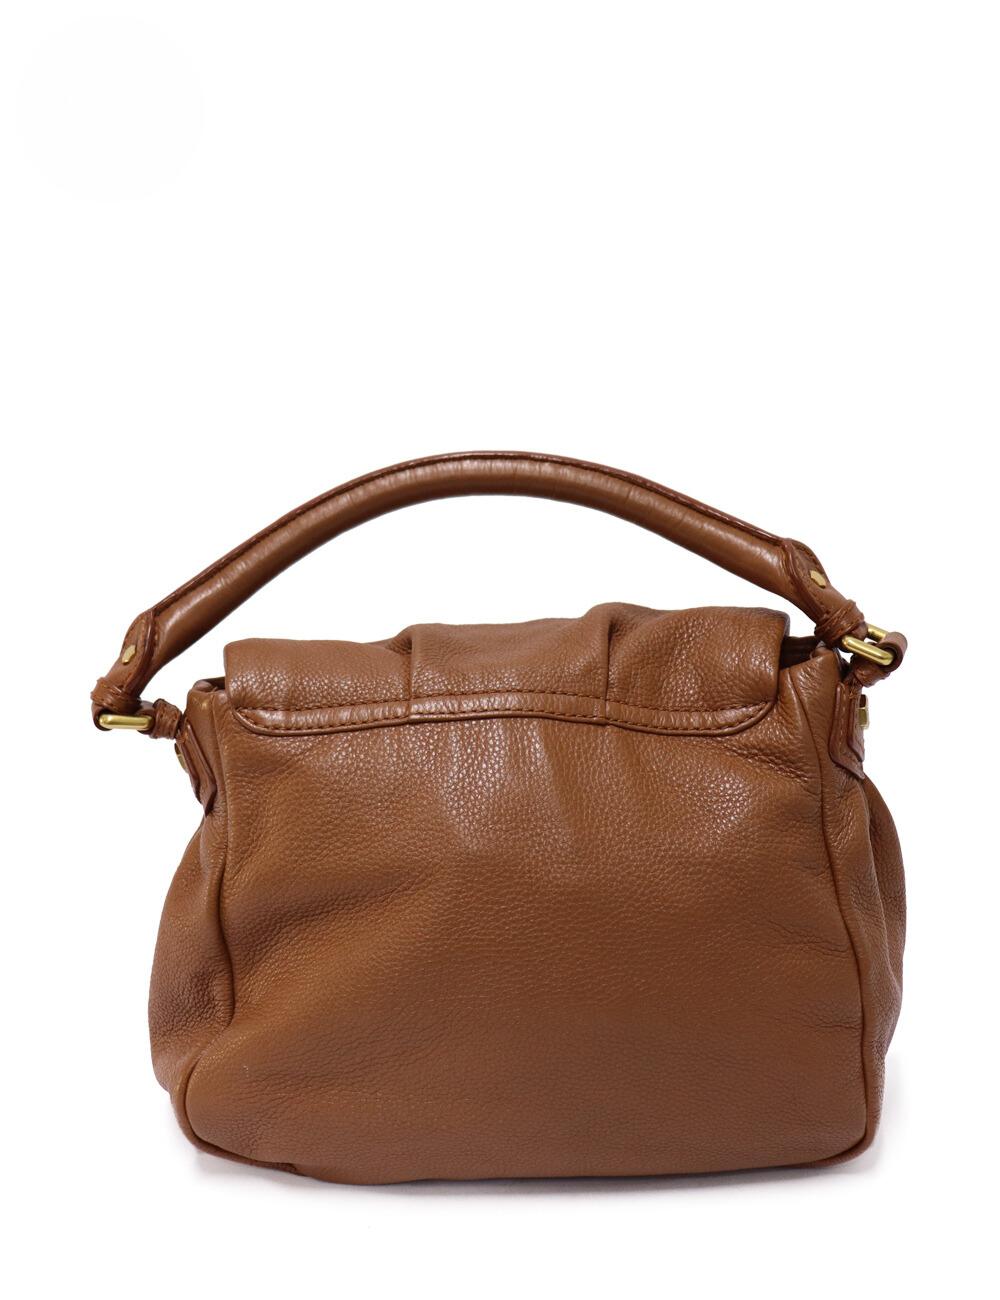 Marc by Marc Jacobs Brown Re-edition Lil Ukita Classic Q Bag For Sale 1